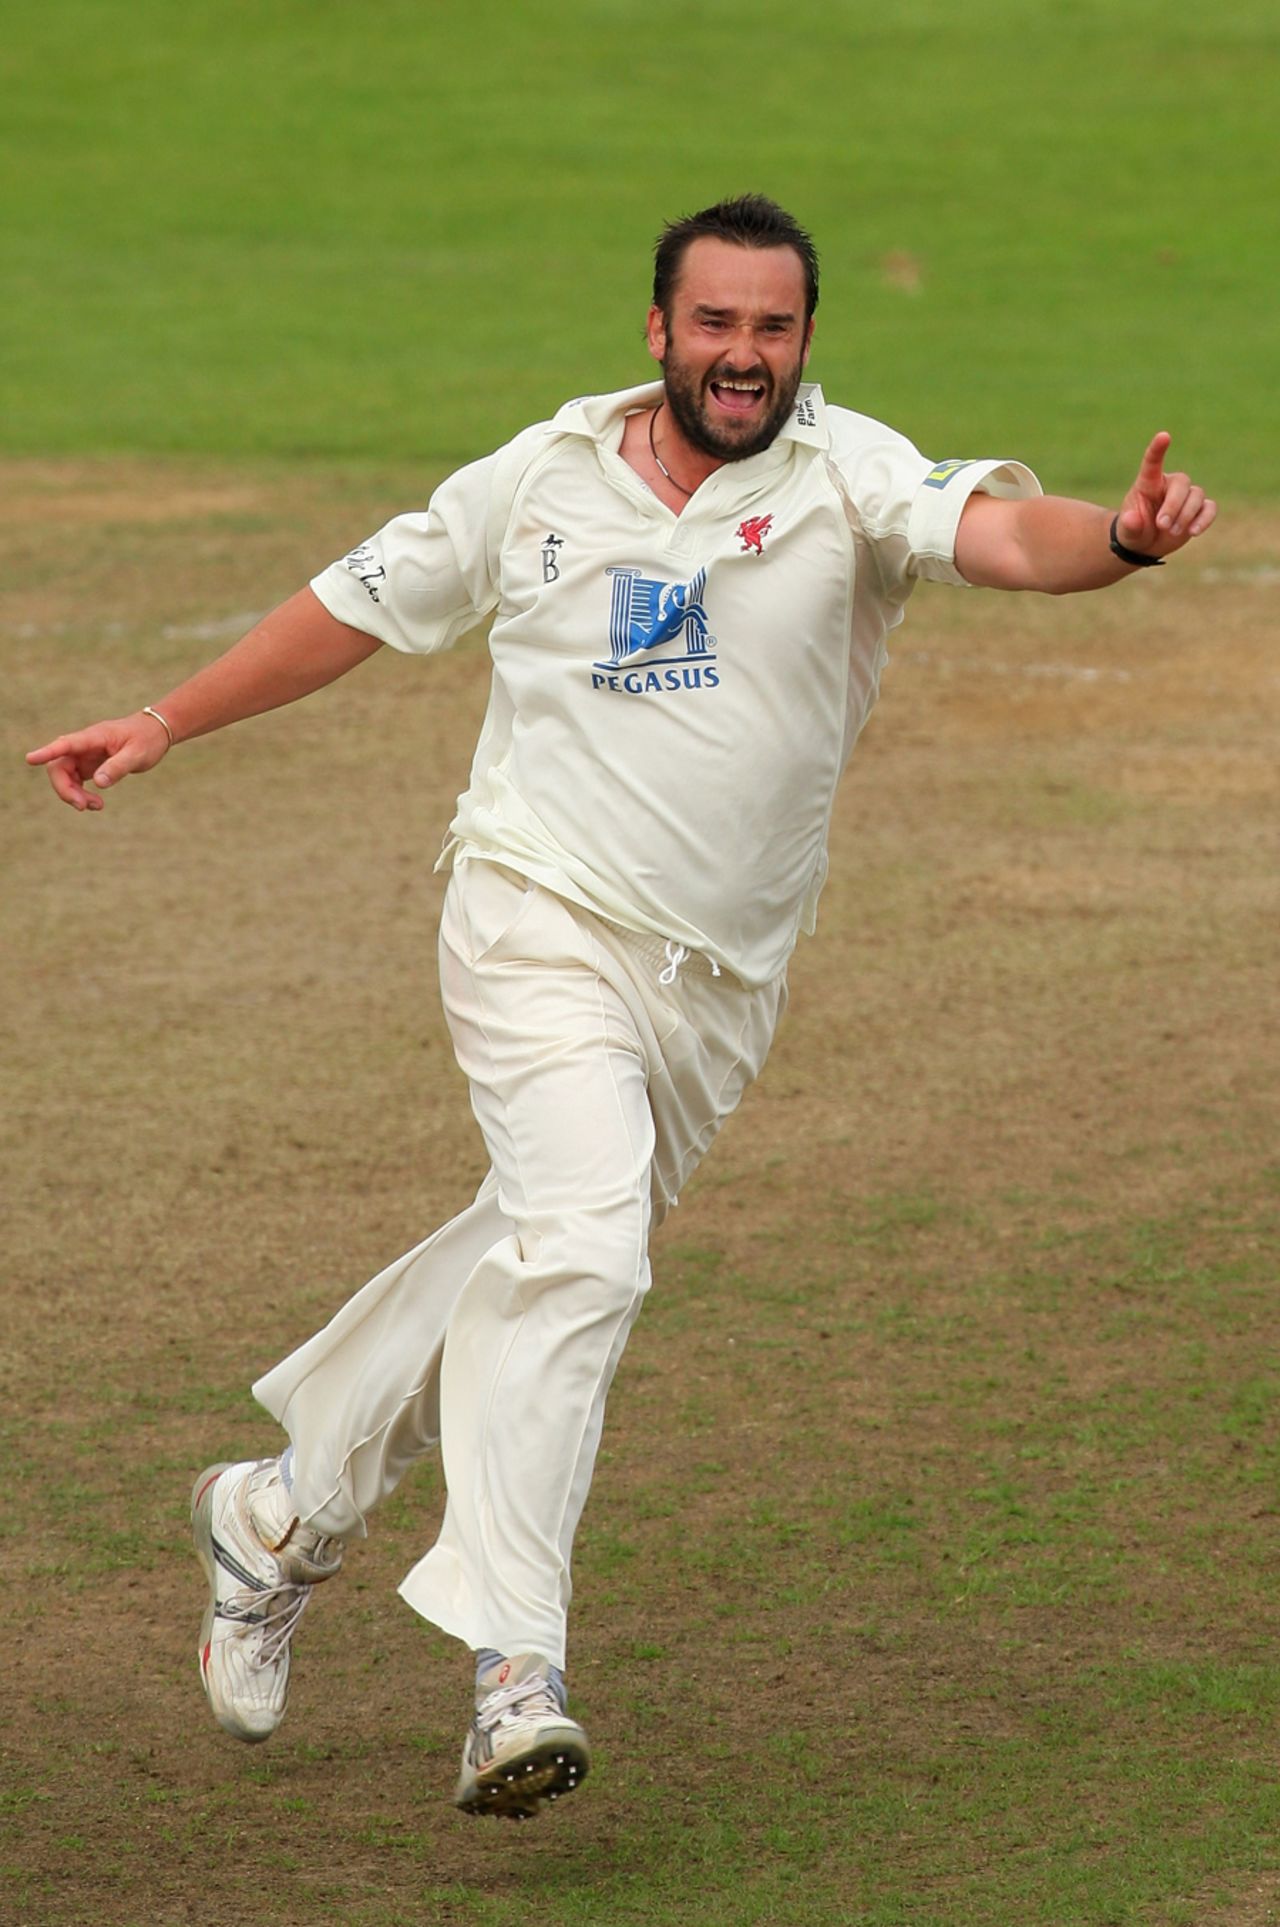 Steffan Jones is delighted after taking a wicket, Somerset v Lancashire, County Championship Division One, Taunton, 2nd day, September 25, 2008